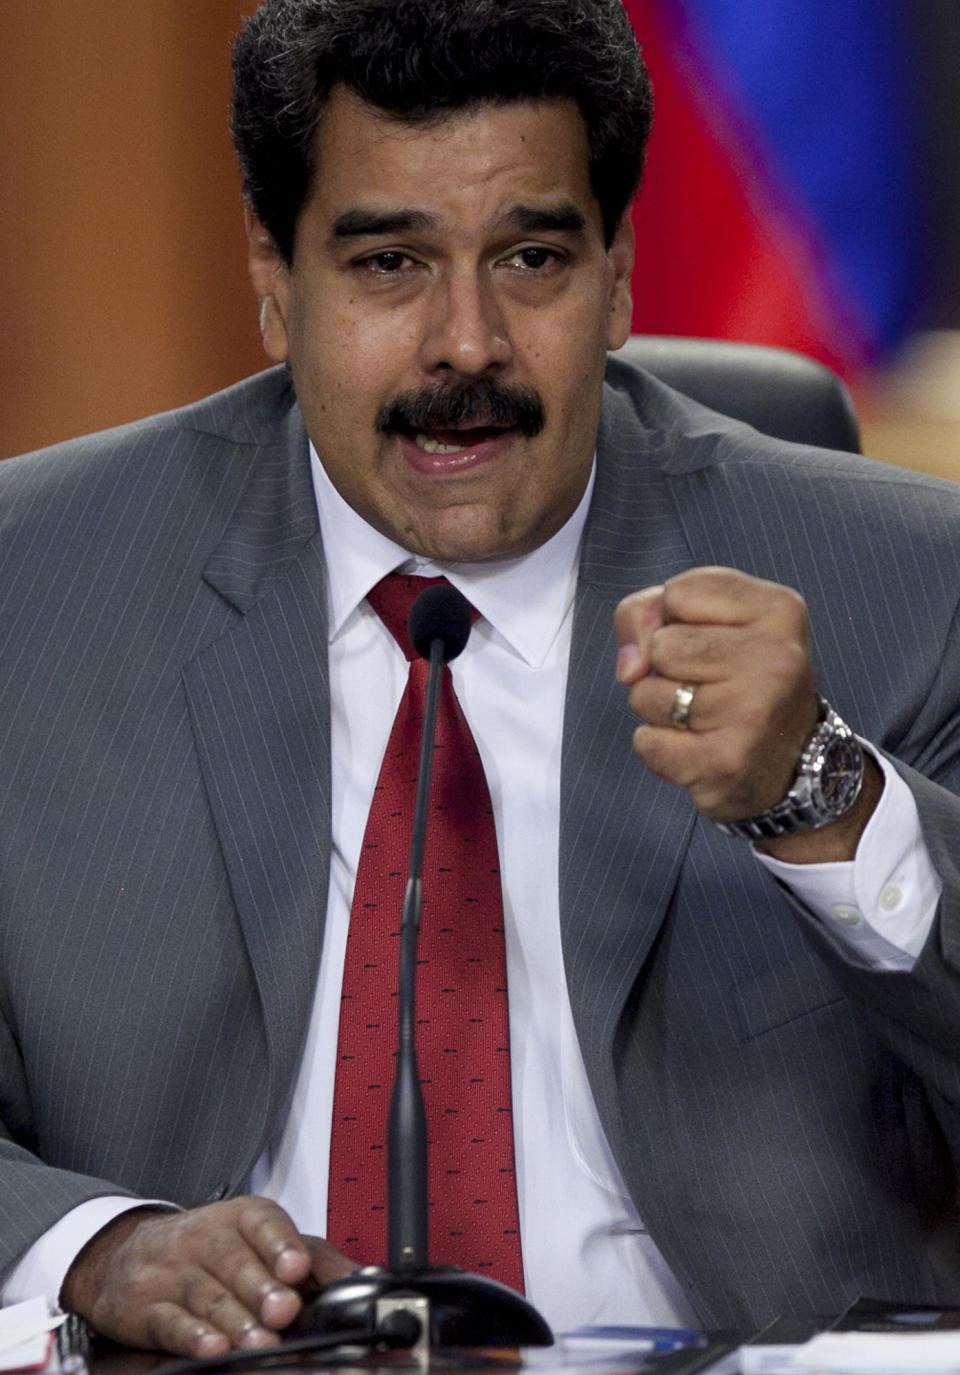 Venezuela's President Nicolas Maduro speaks during a press conference at the Miraflores presidential palace in Caracas, Venezuela, Friday, March 14, 2014. The Venezuelan government is stepping up security operations in Caracas and other cities where demonstrators are blocking streets, avenues and highways. Maduro said that those involved in creating road barricades will be arrested. (AP Photo/Alejandro Cegarra)